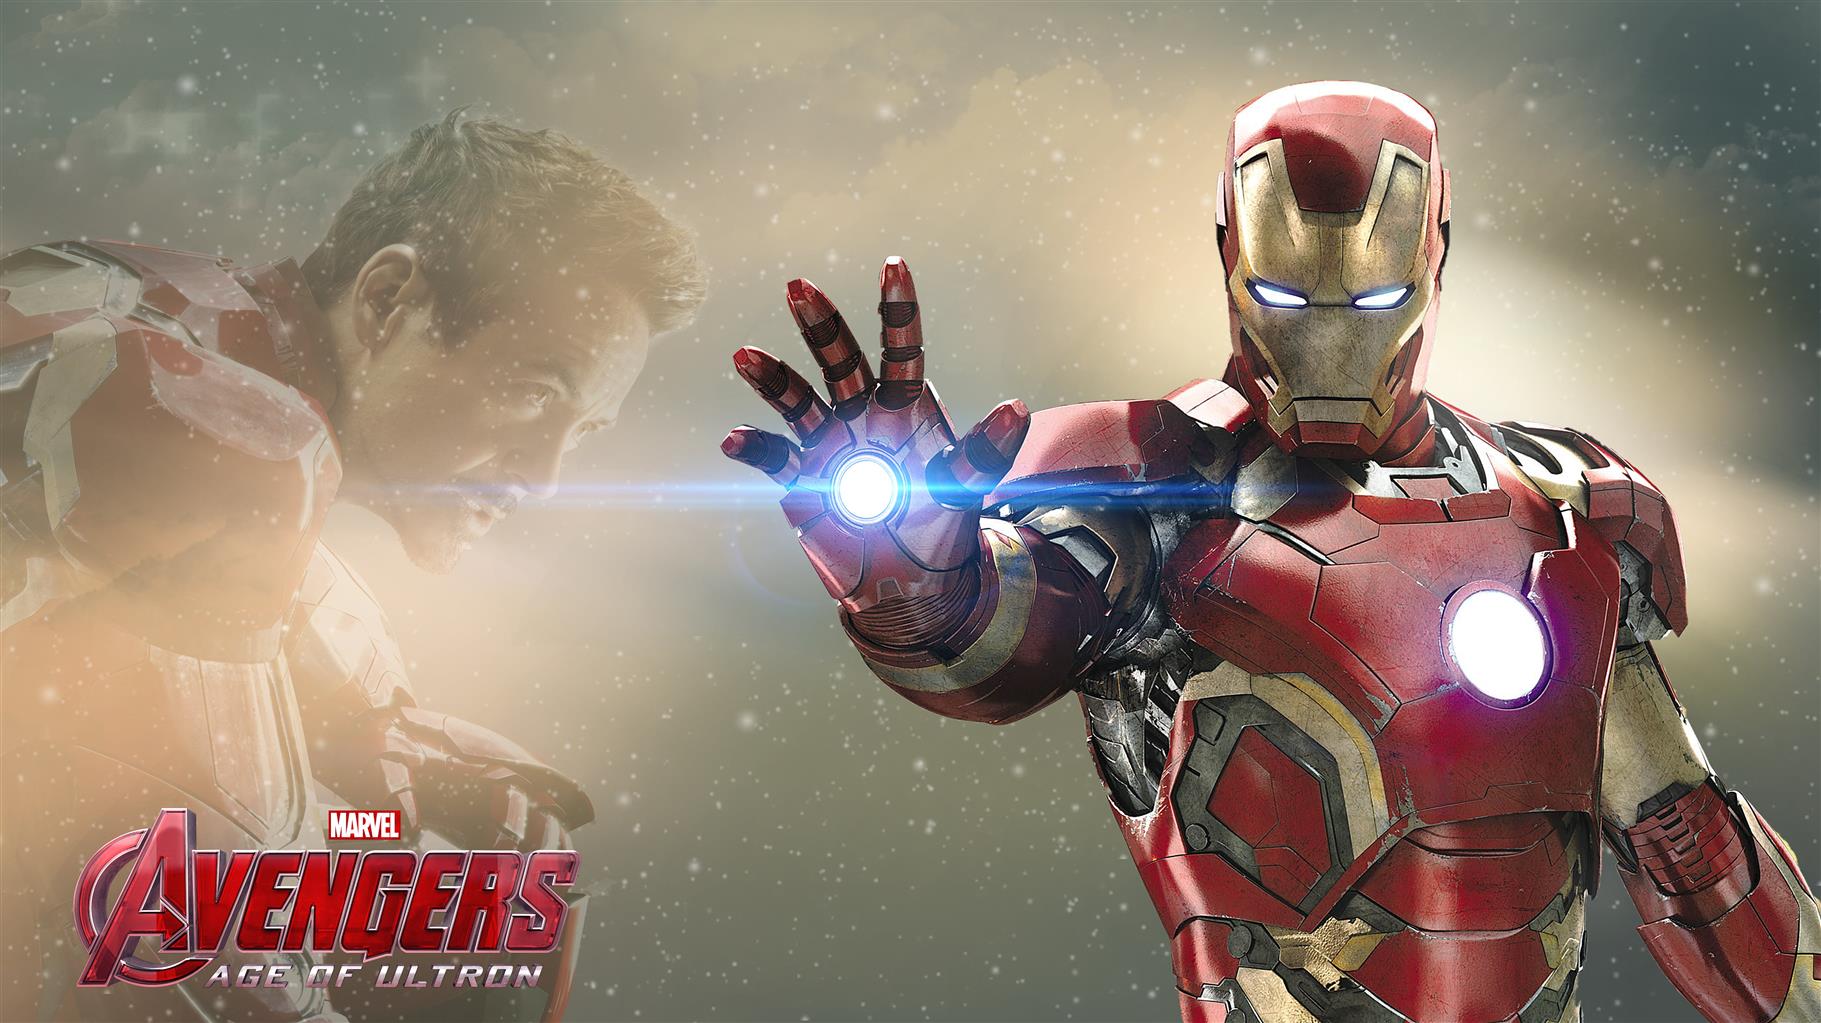 Marvel Avengers Age of Ultron Iron Man poster, Tony Stark, Avengers: Age of Ultron, HD wallpaper